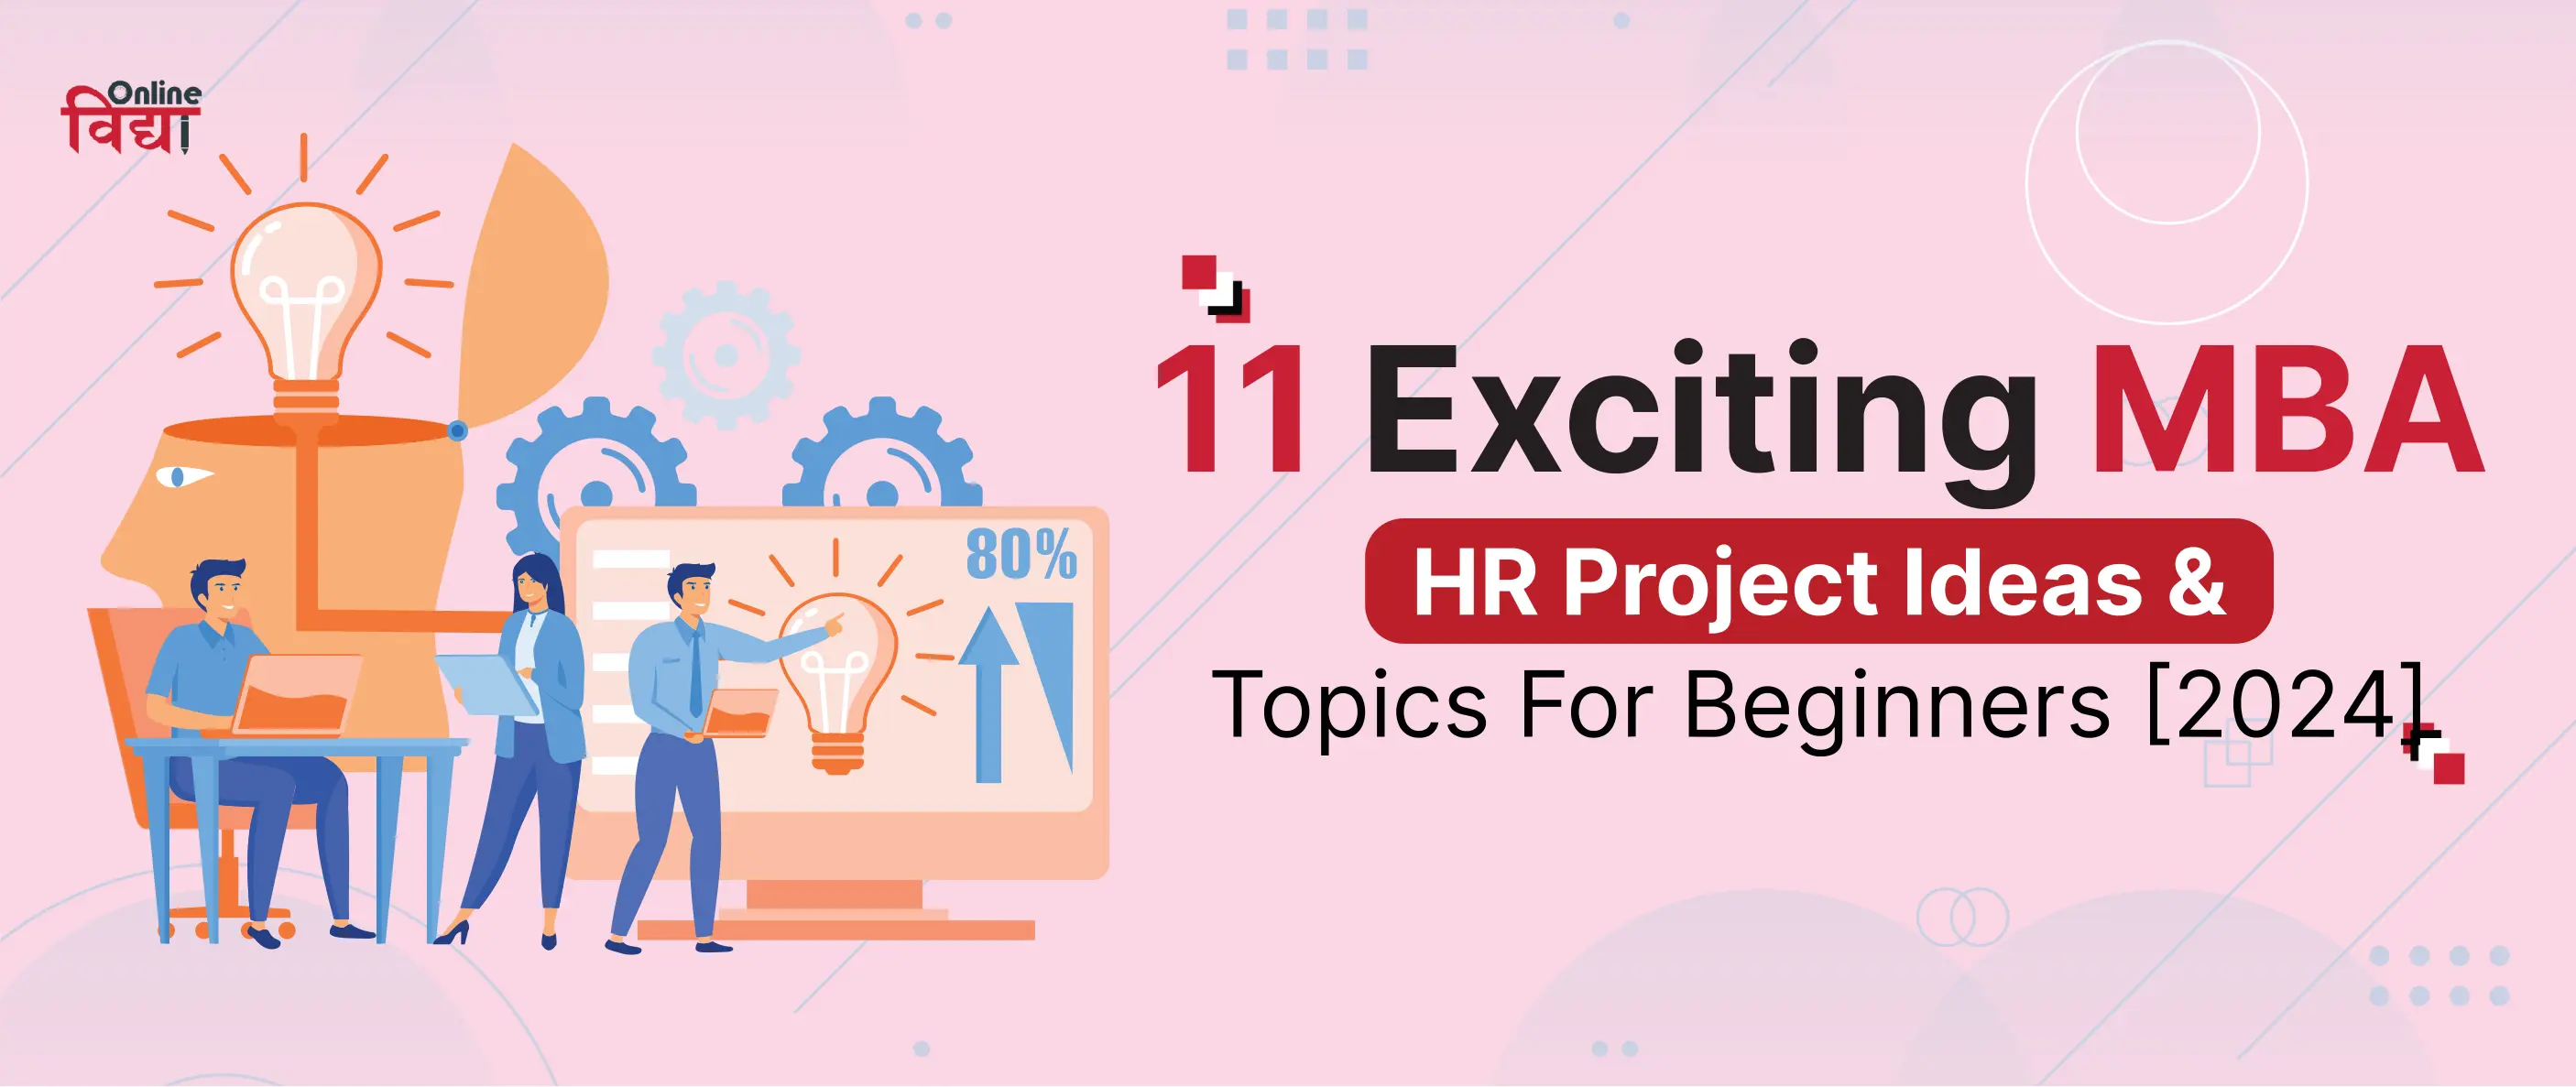 11 Exciting MBA HR Project Ideas & Topics For Beginners [2024]